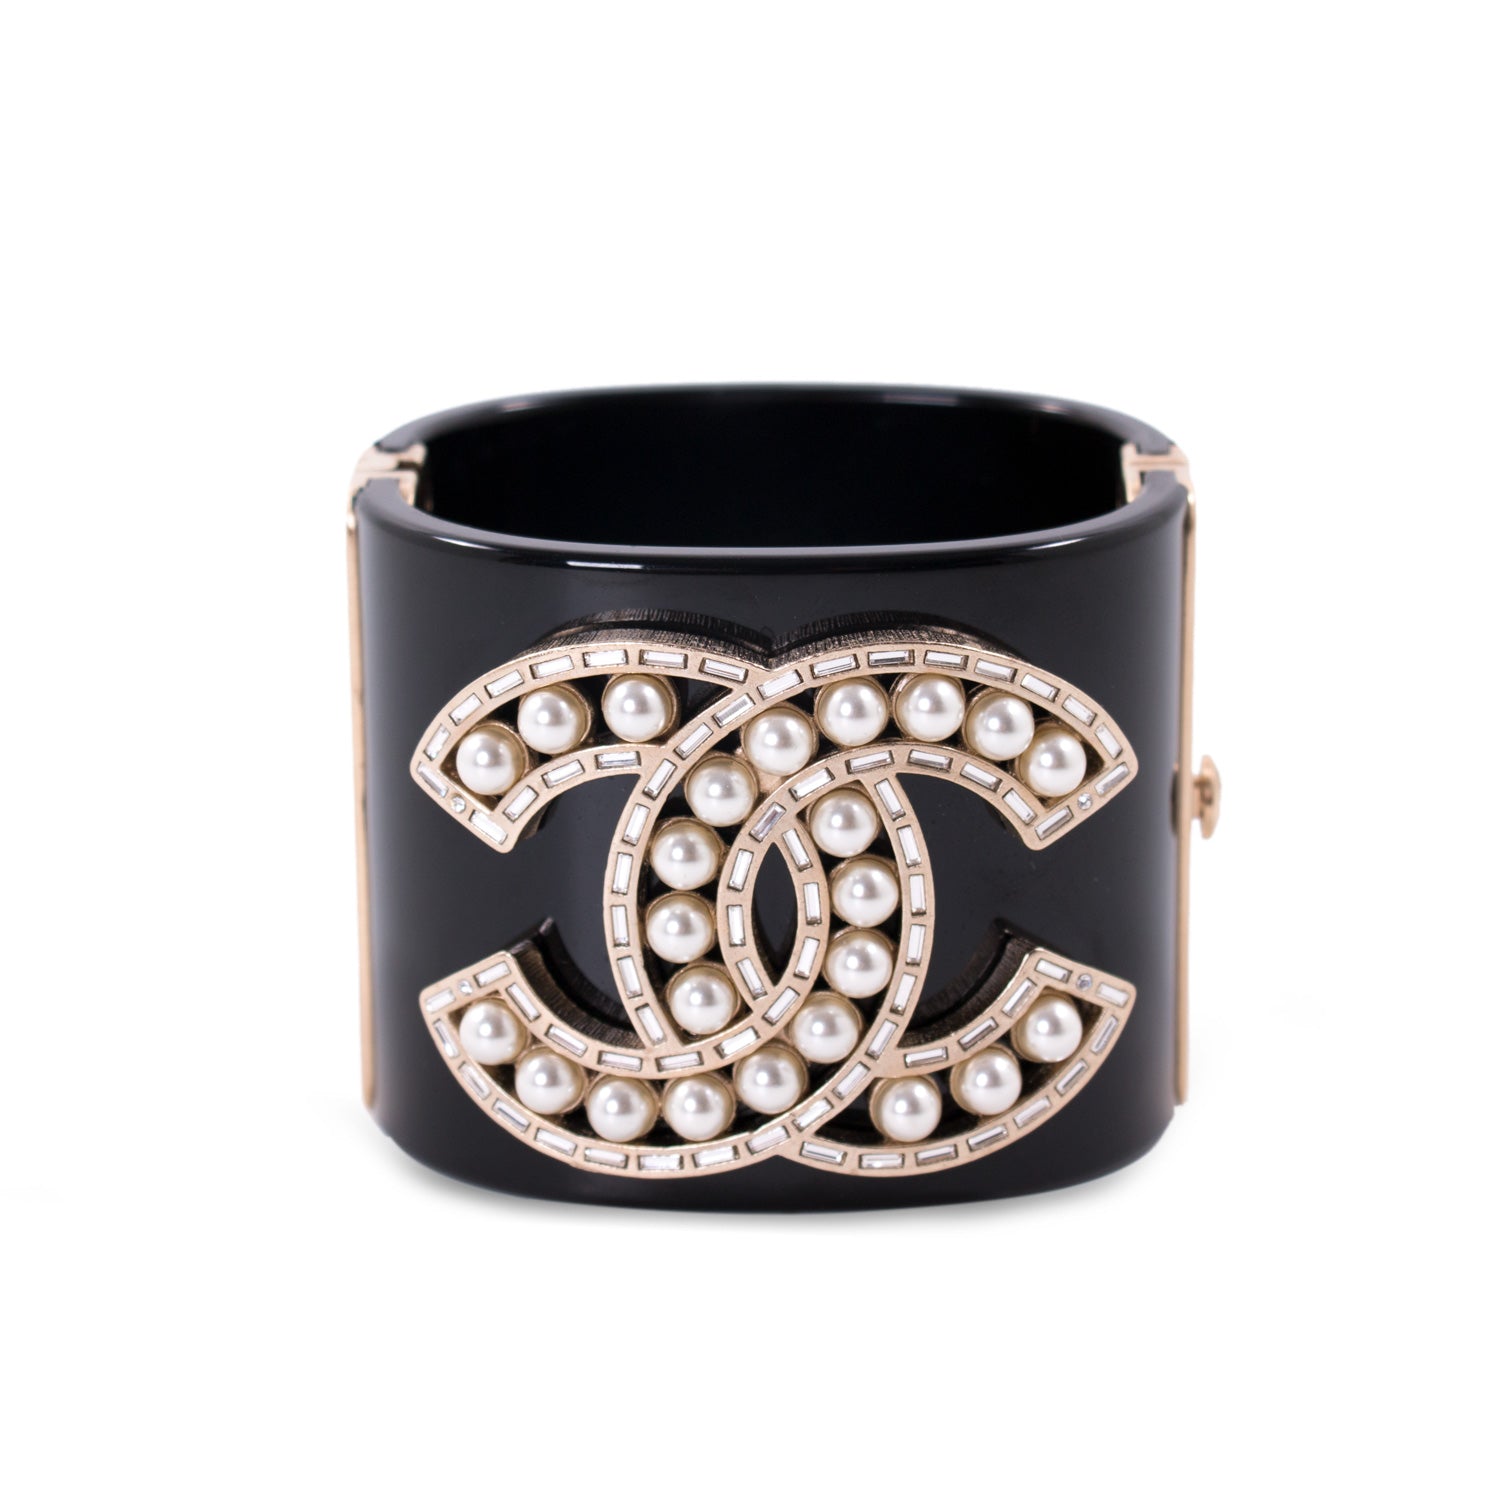 Shop authentic Chanel Pearl and Resin Cuff at revogue for just USD